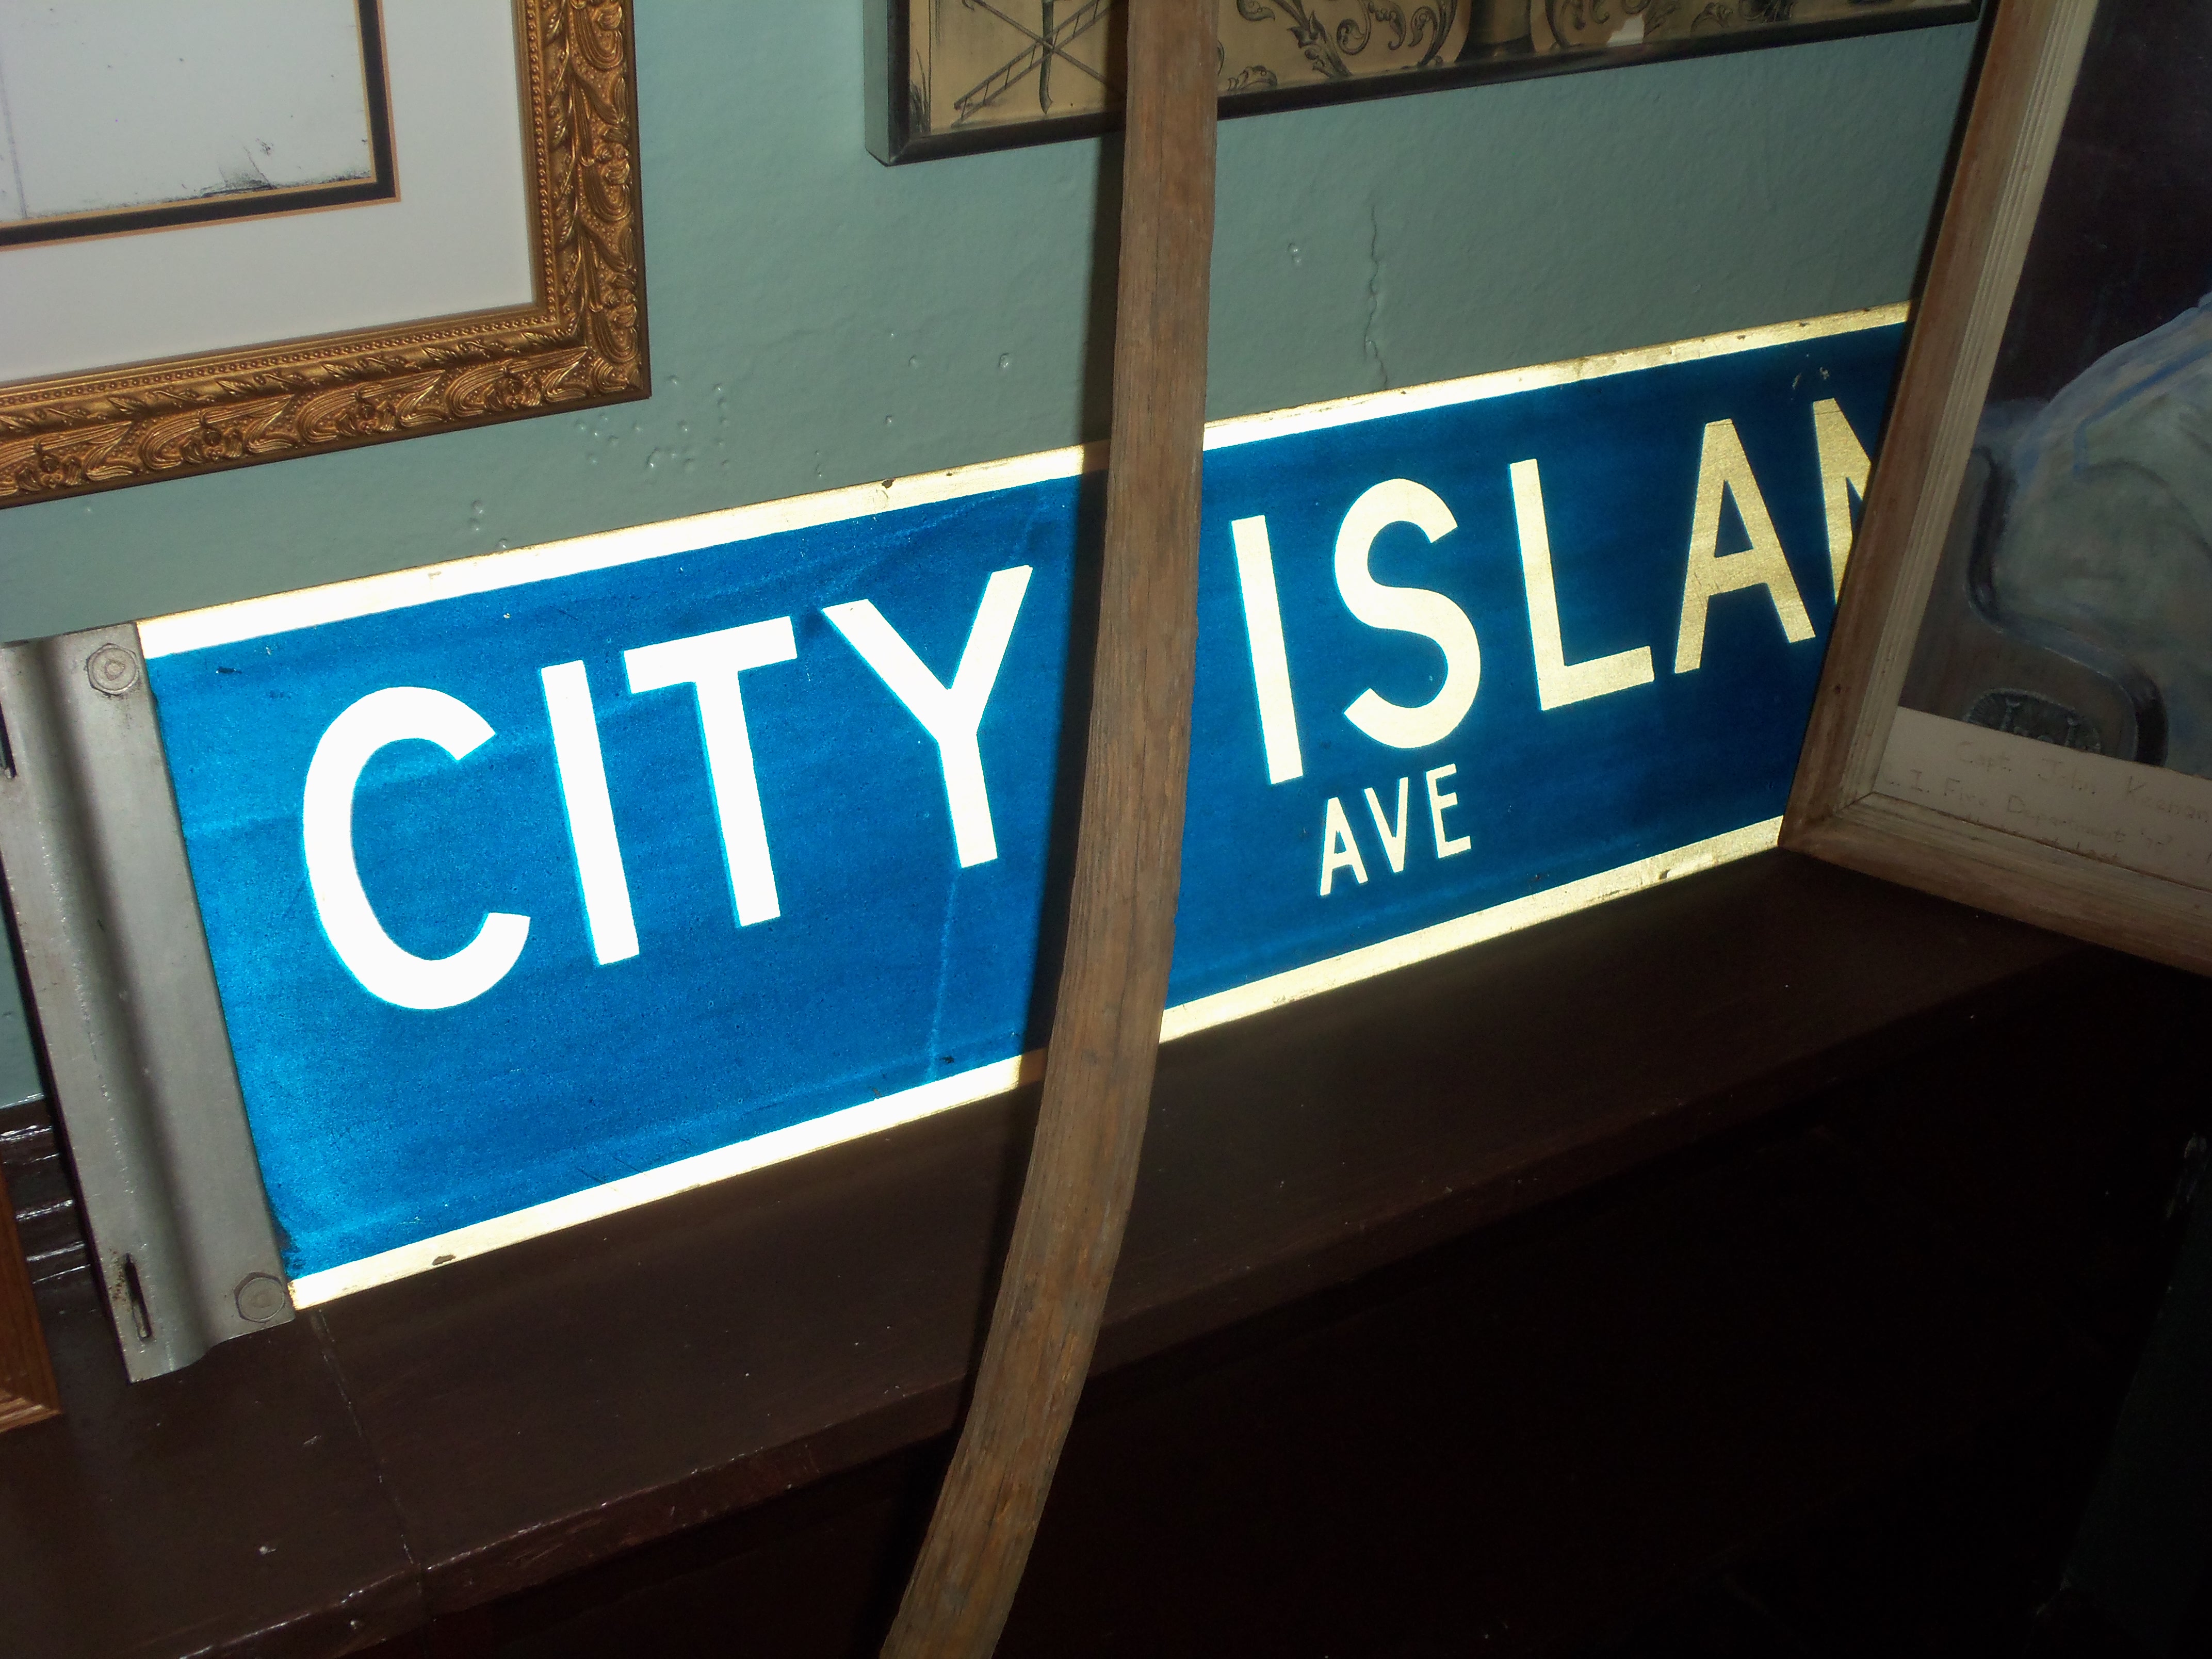 City Island blue and white street sign